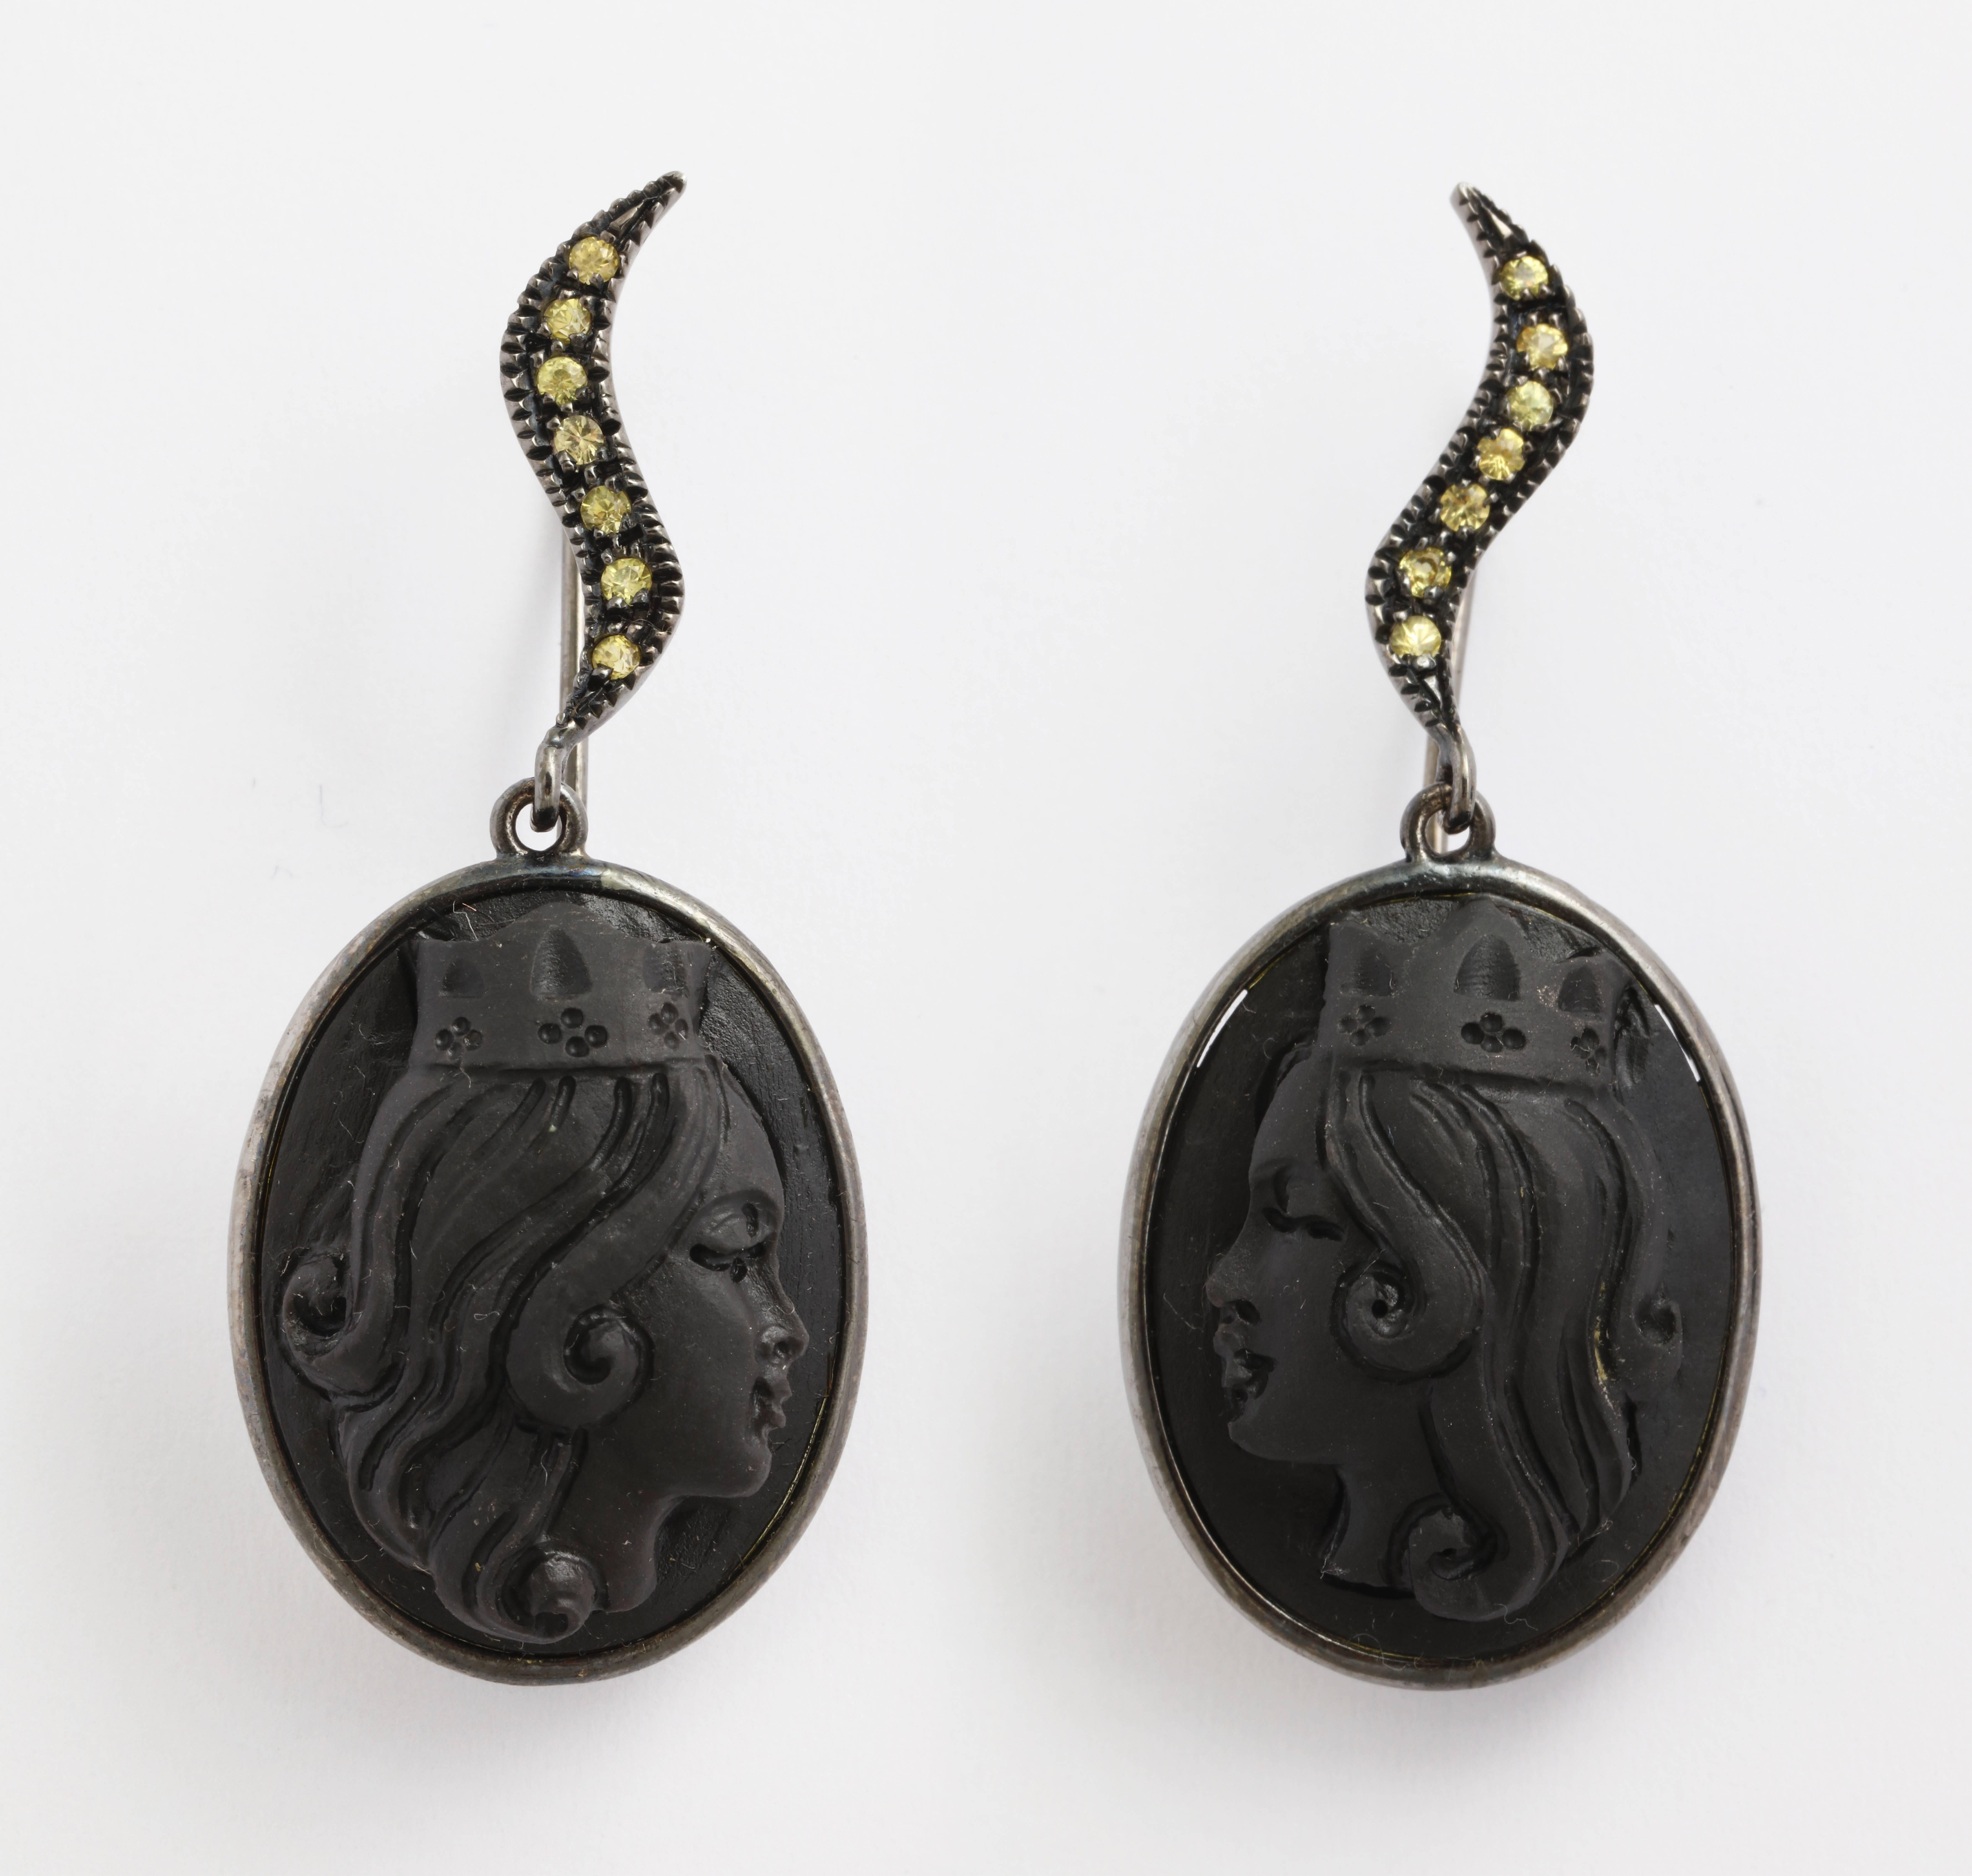 25mm black lava cameos hand-carved set in oxidized sterling silver earrings with yellow sapphires.